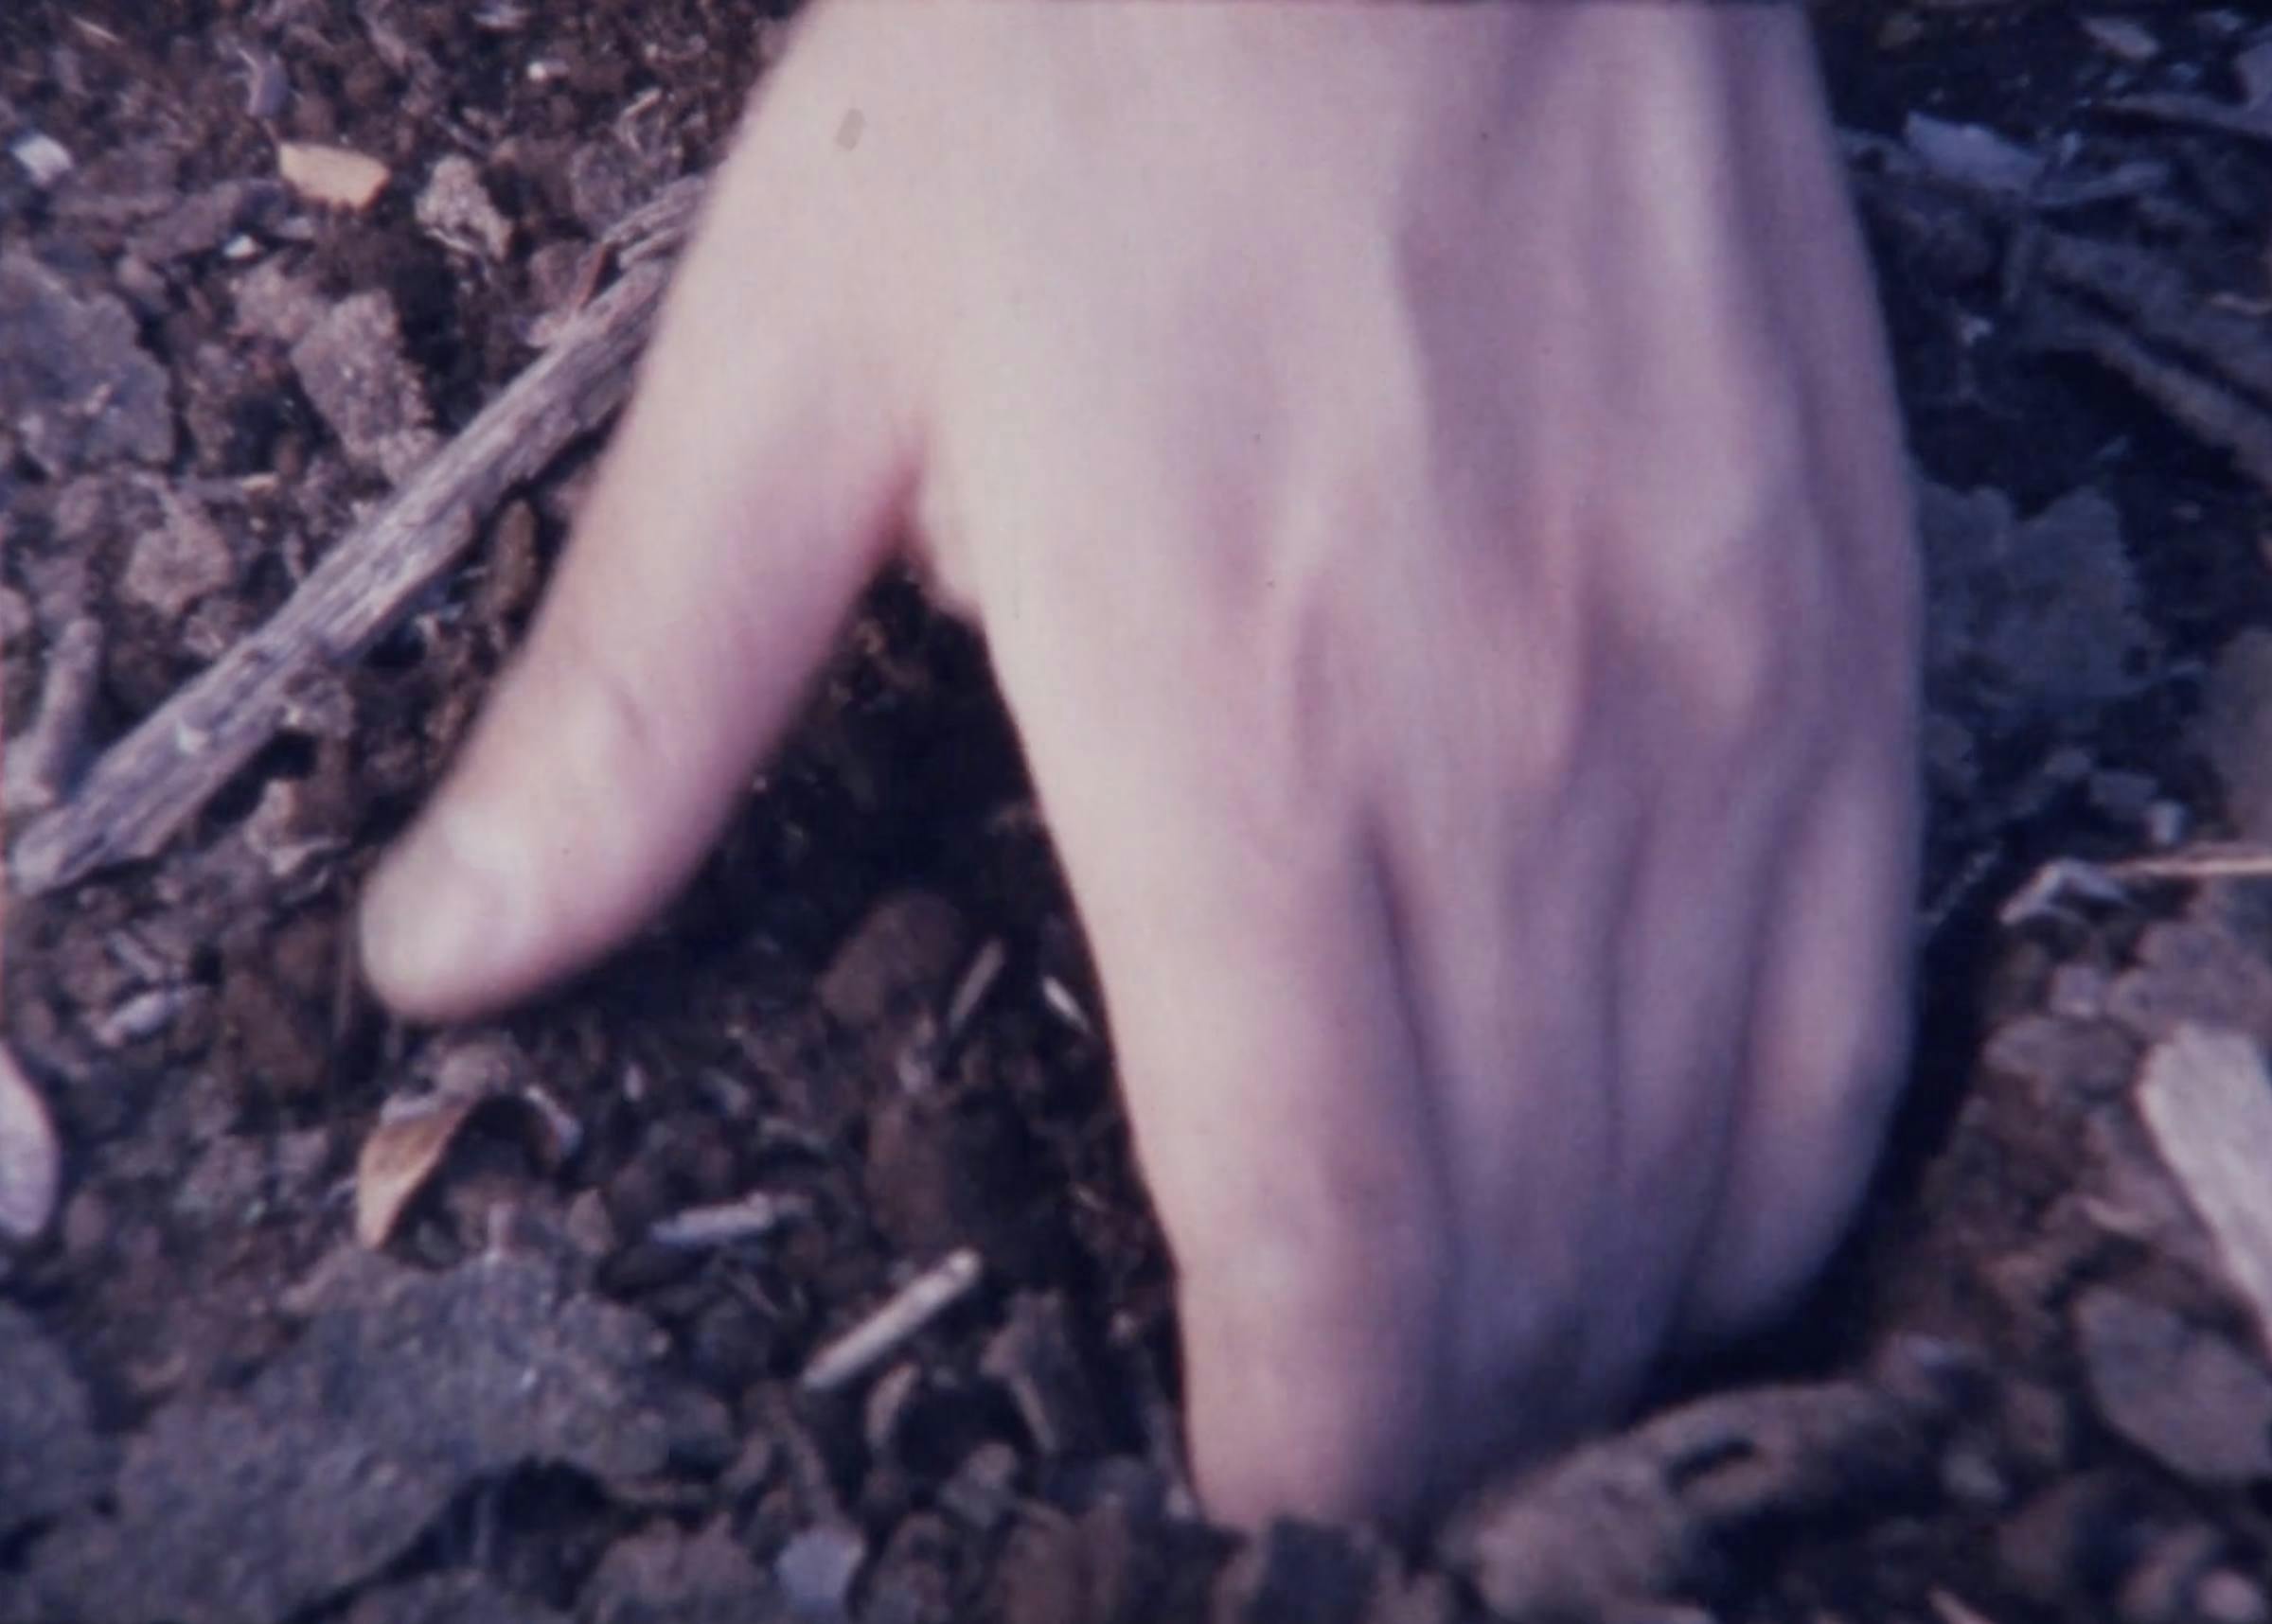 Image of a hand close up, fingers digging into the ground. The ground is covered with bark and twigs